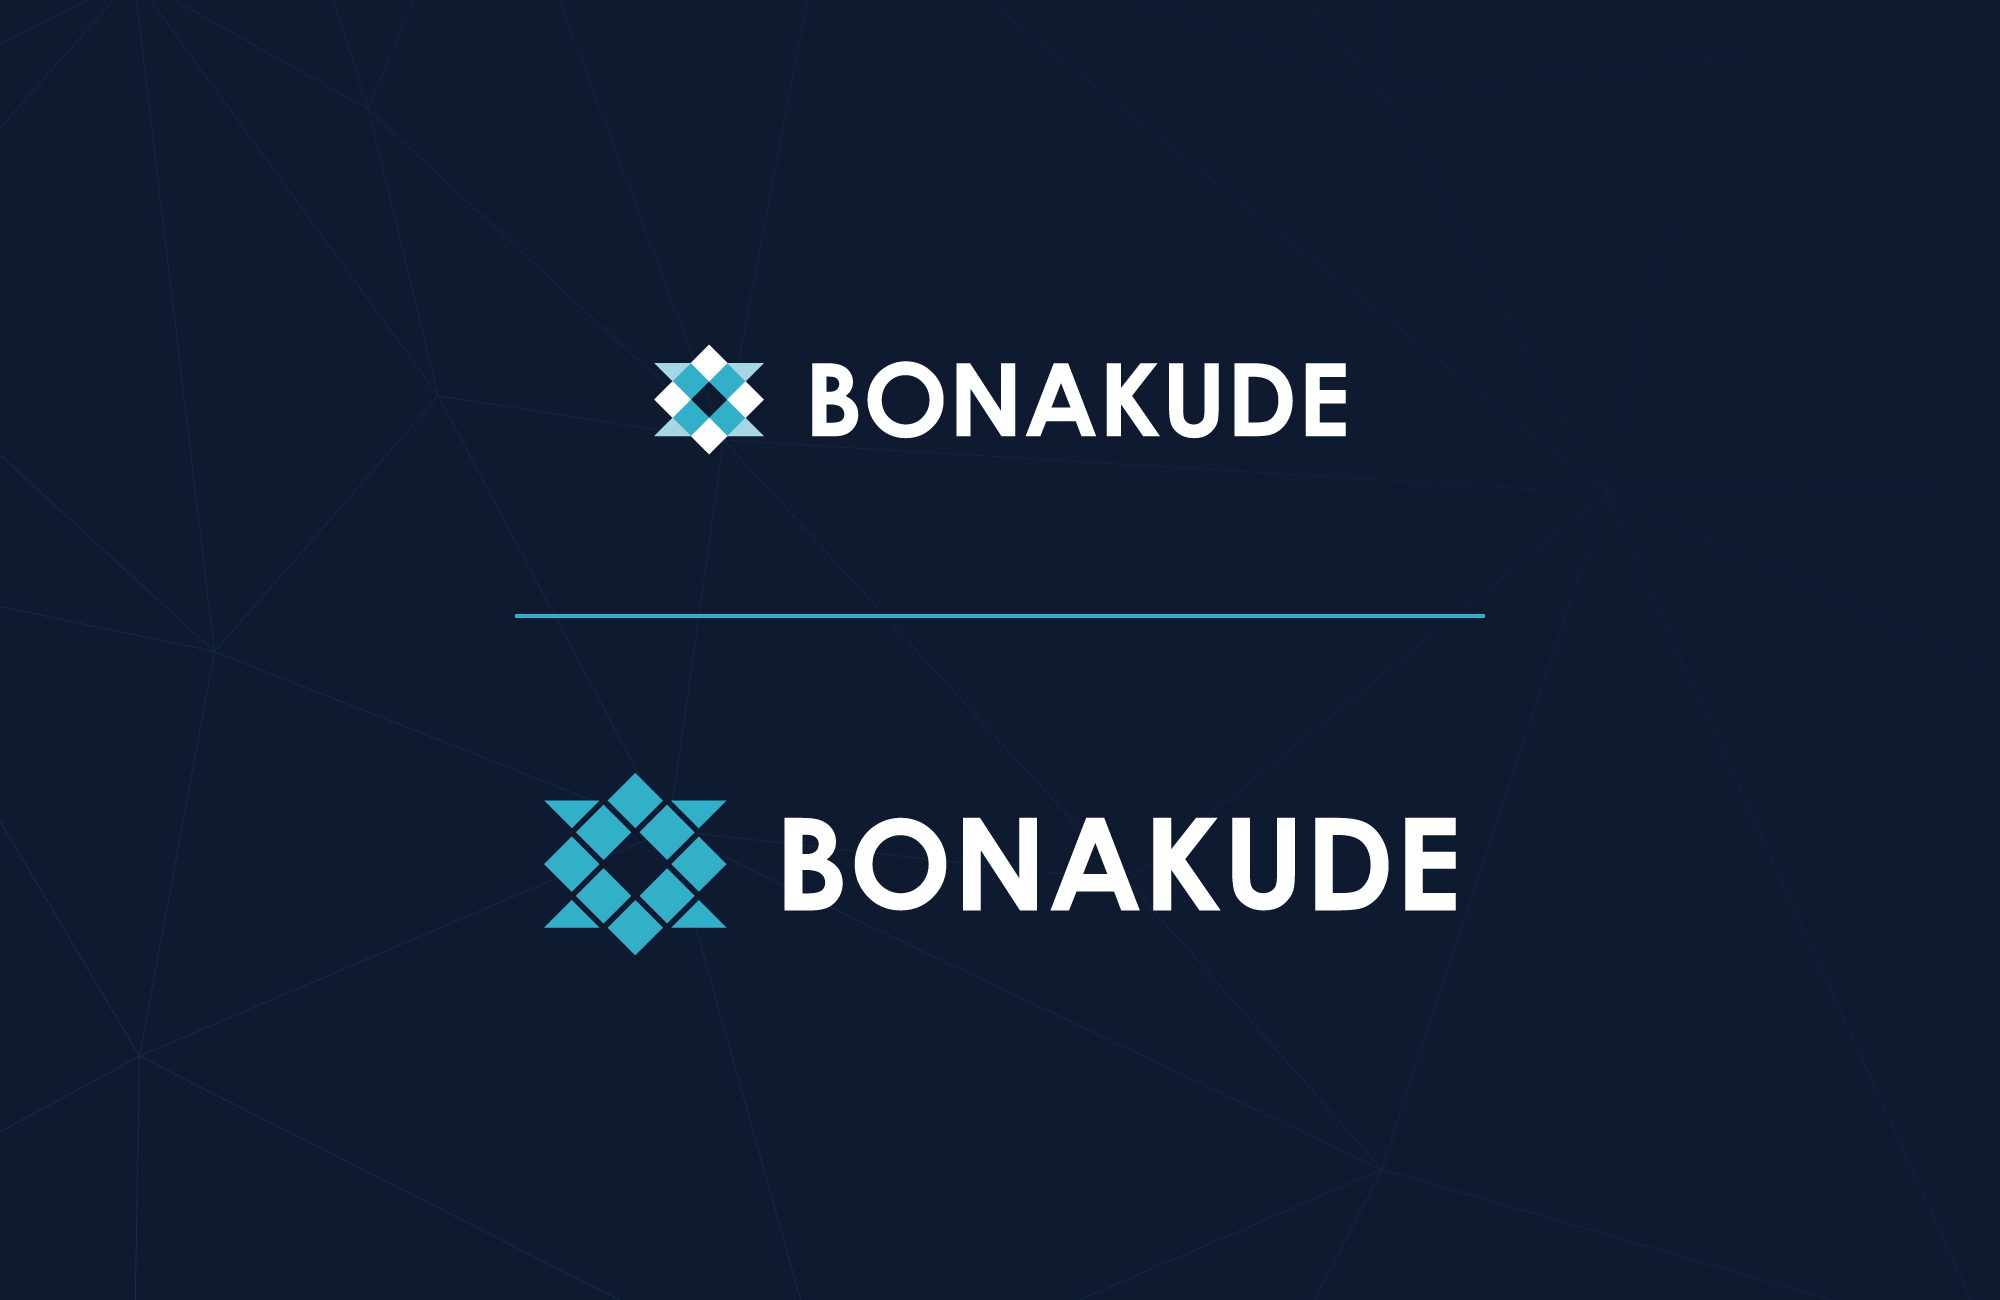 Bonakude Consulting iKind Media Project (1)